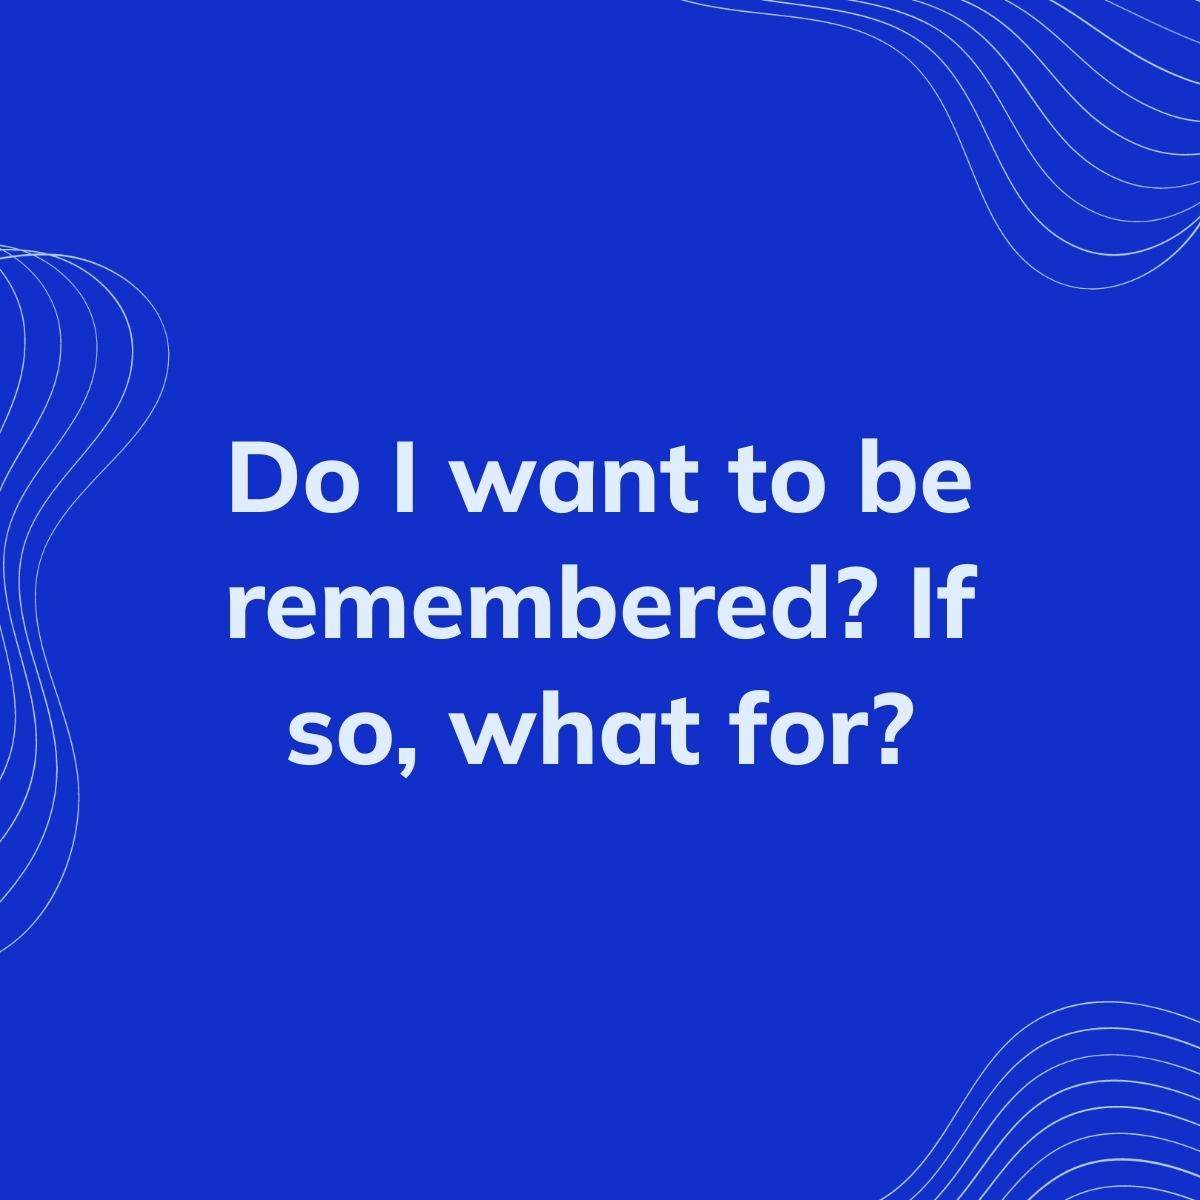 Journal Prompt: Do I want to be remembered? If so, what for?